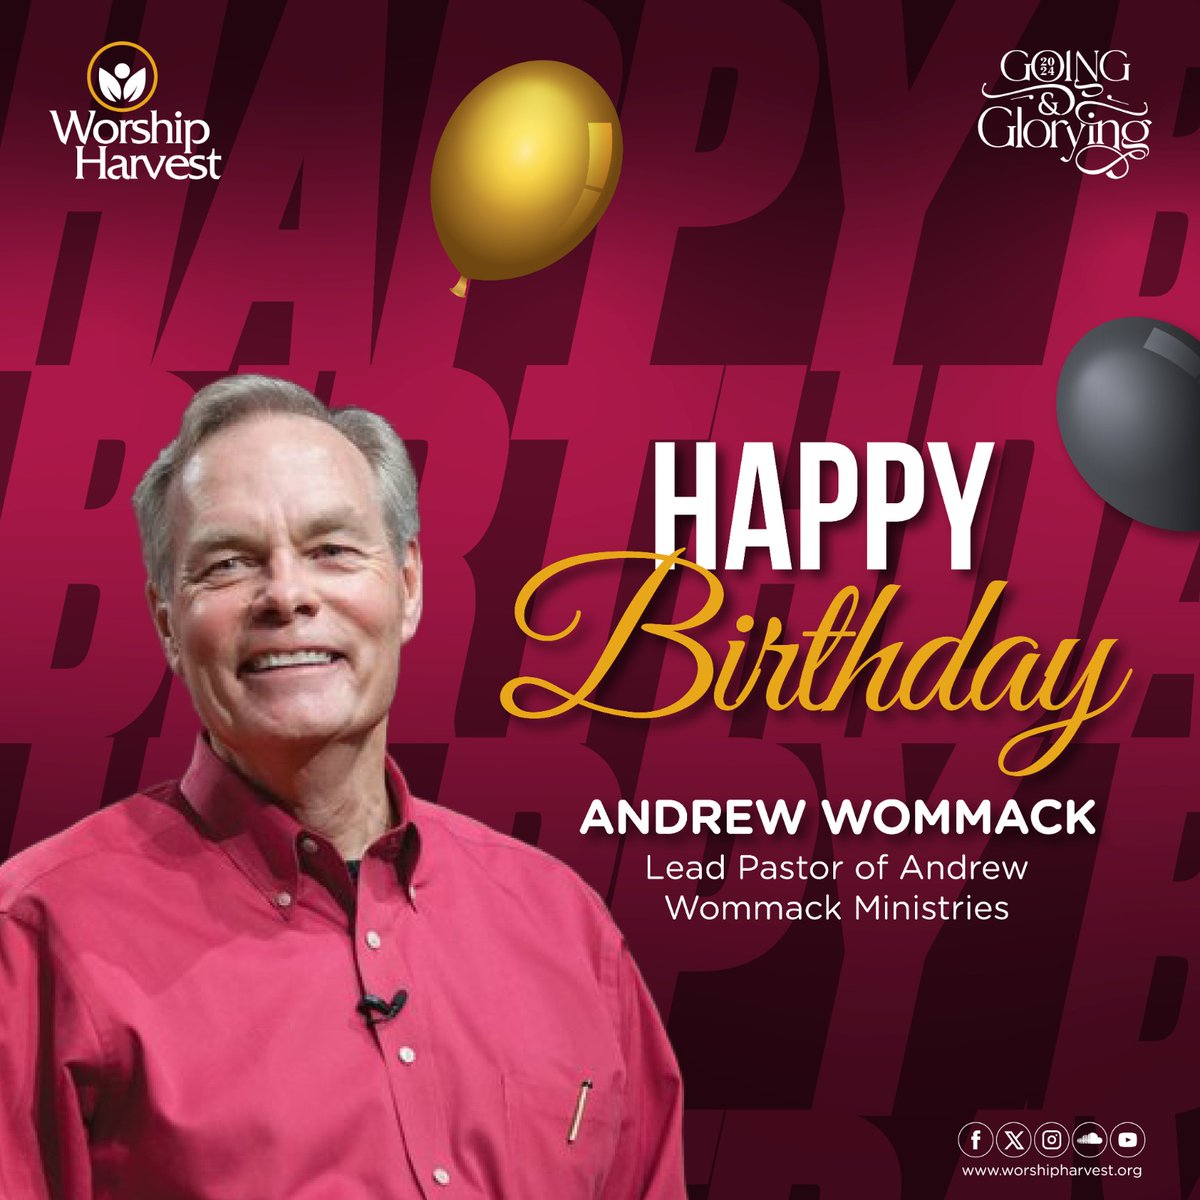 You are a blessing not only to our generation but also to the coming generation. Happy birthday, @andrewwommack #WorshipHarvest